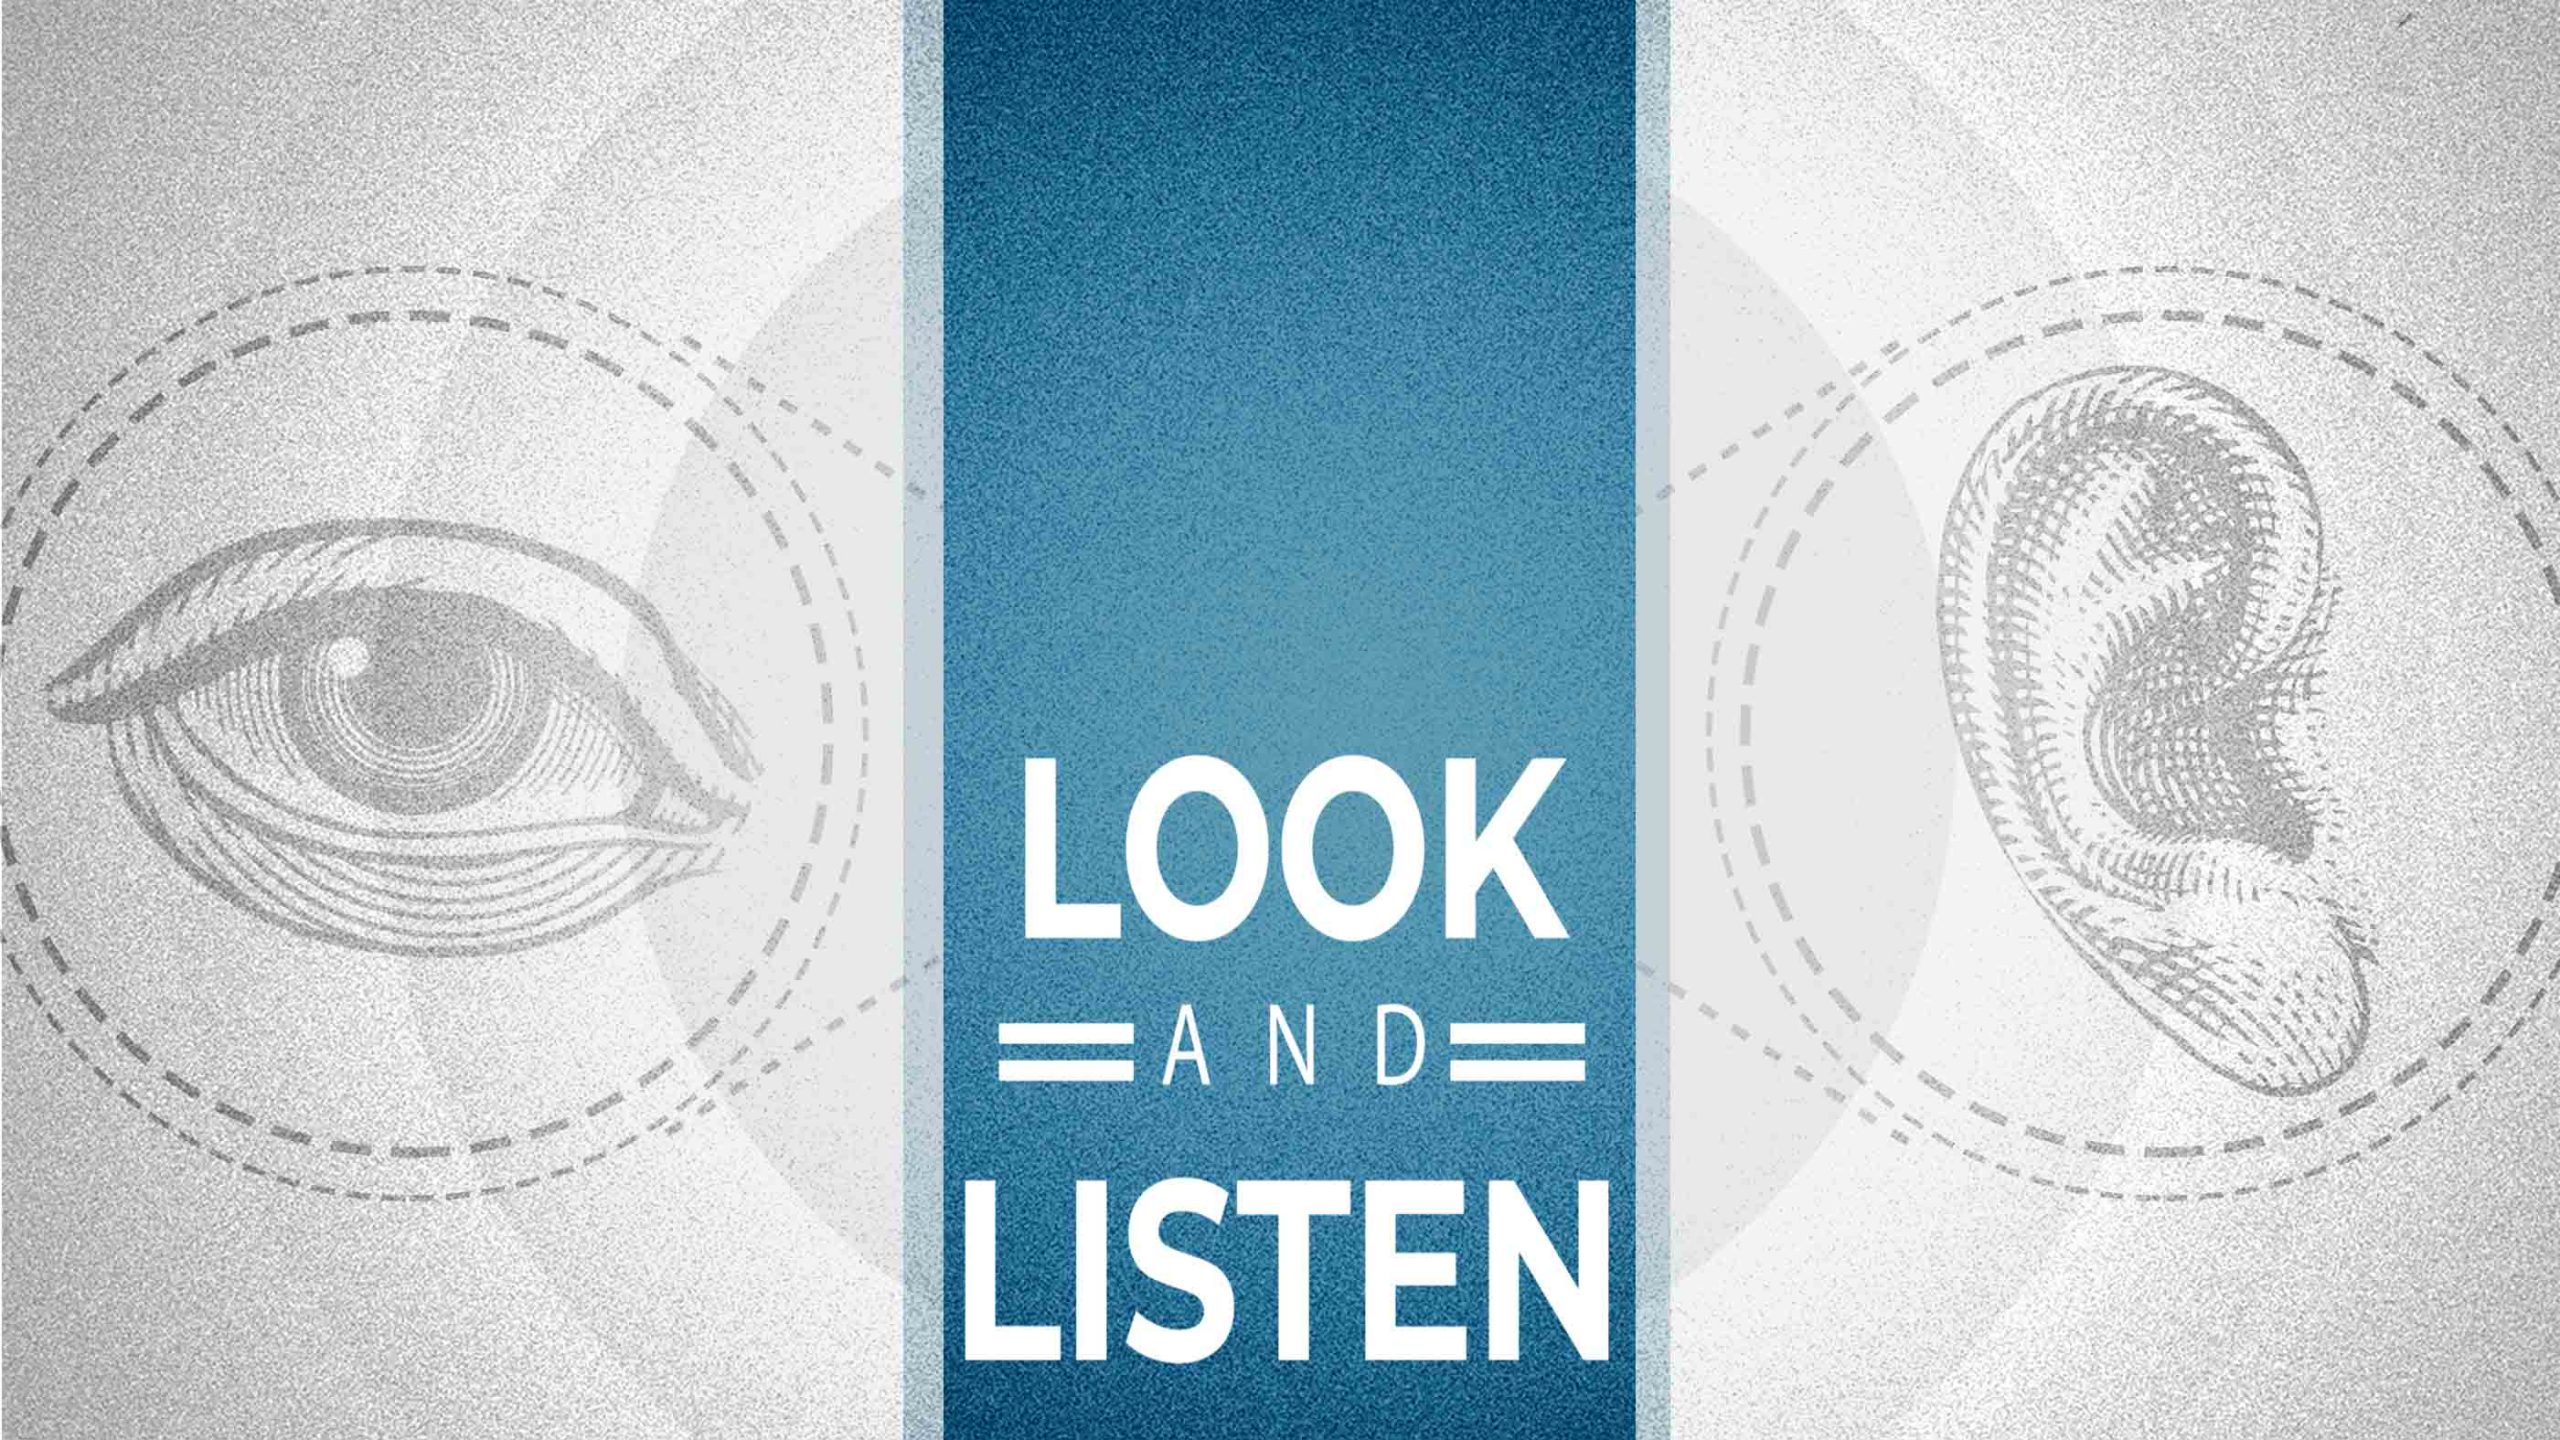 Look and Listen